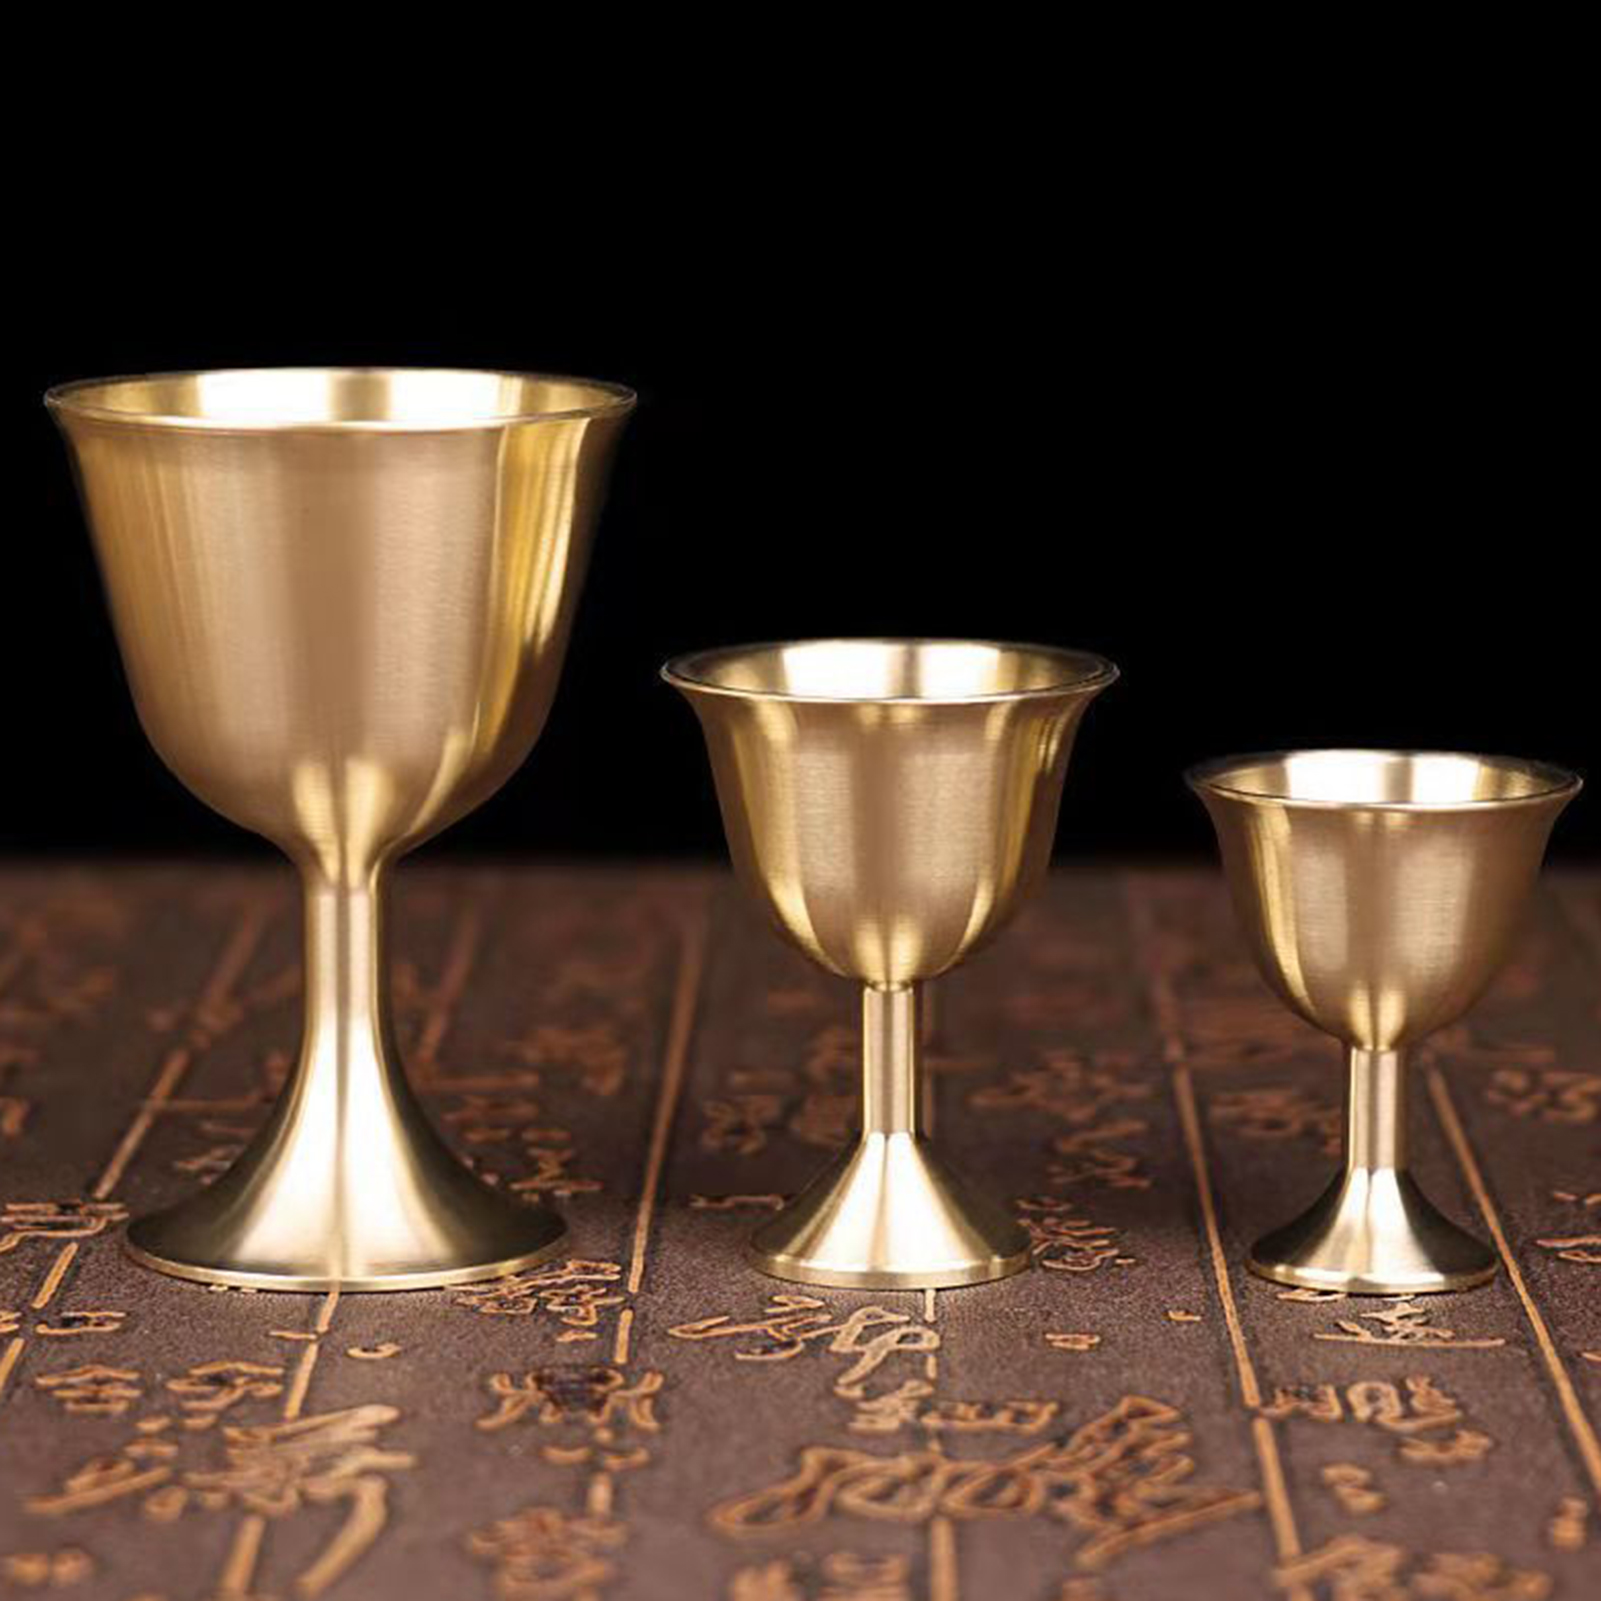 EXCEART Metal Wine Goblets Old- fashioned metal wine